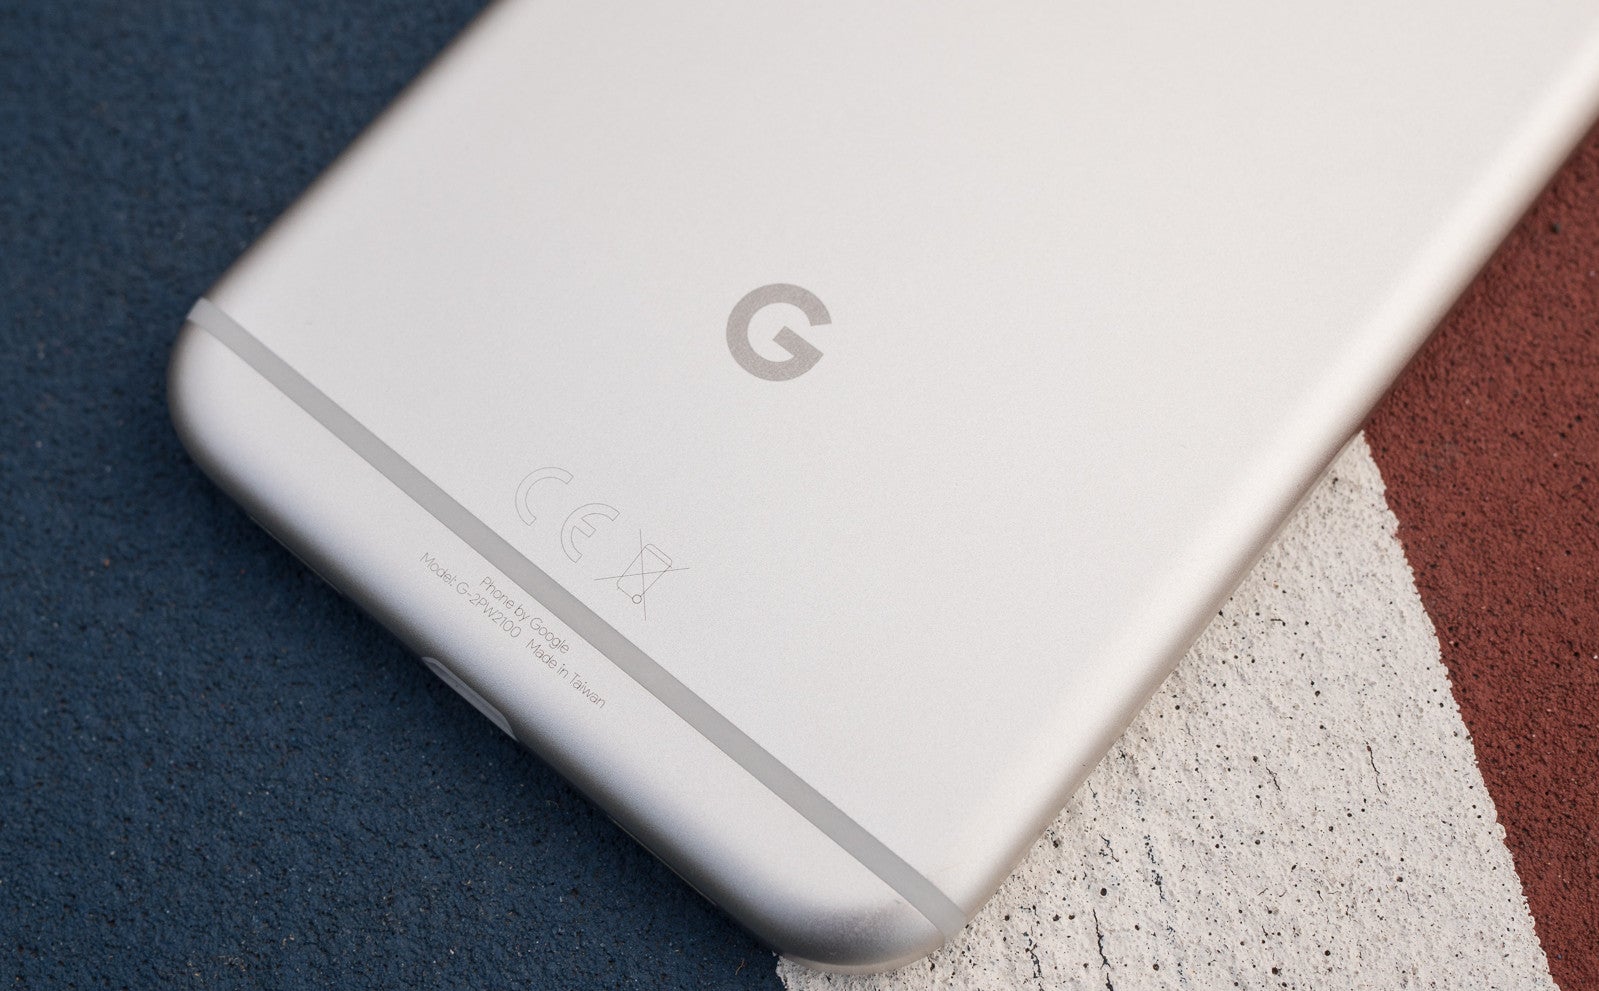 Google loses head of Pixel division, as David Foster returns to Amazon